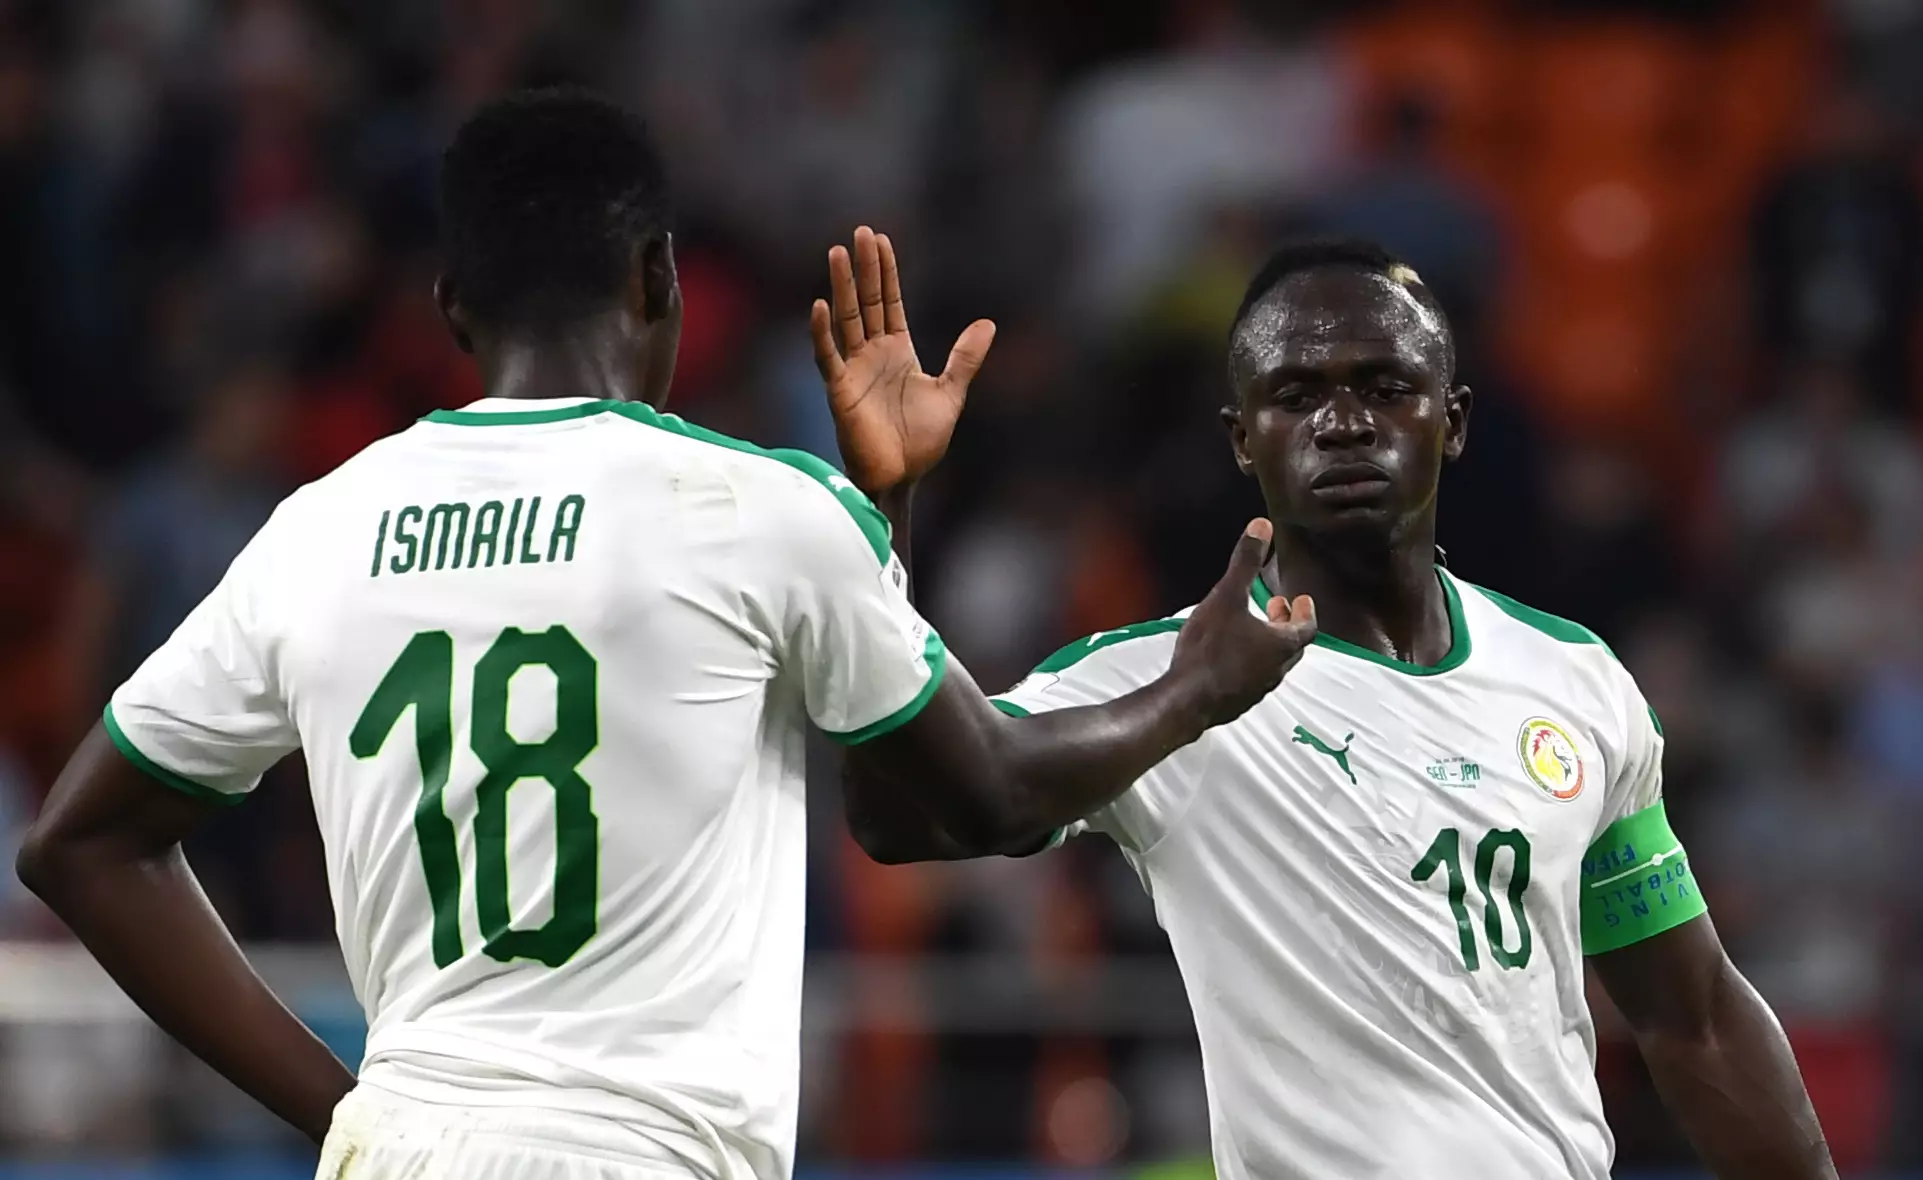 Senegal's Sadio Mane claps with teammate Ismaila Sarr after the 2018 FIFA World Cup Group H match between Japan and Senegal. Image: PA